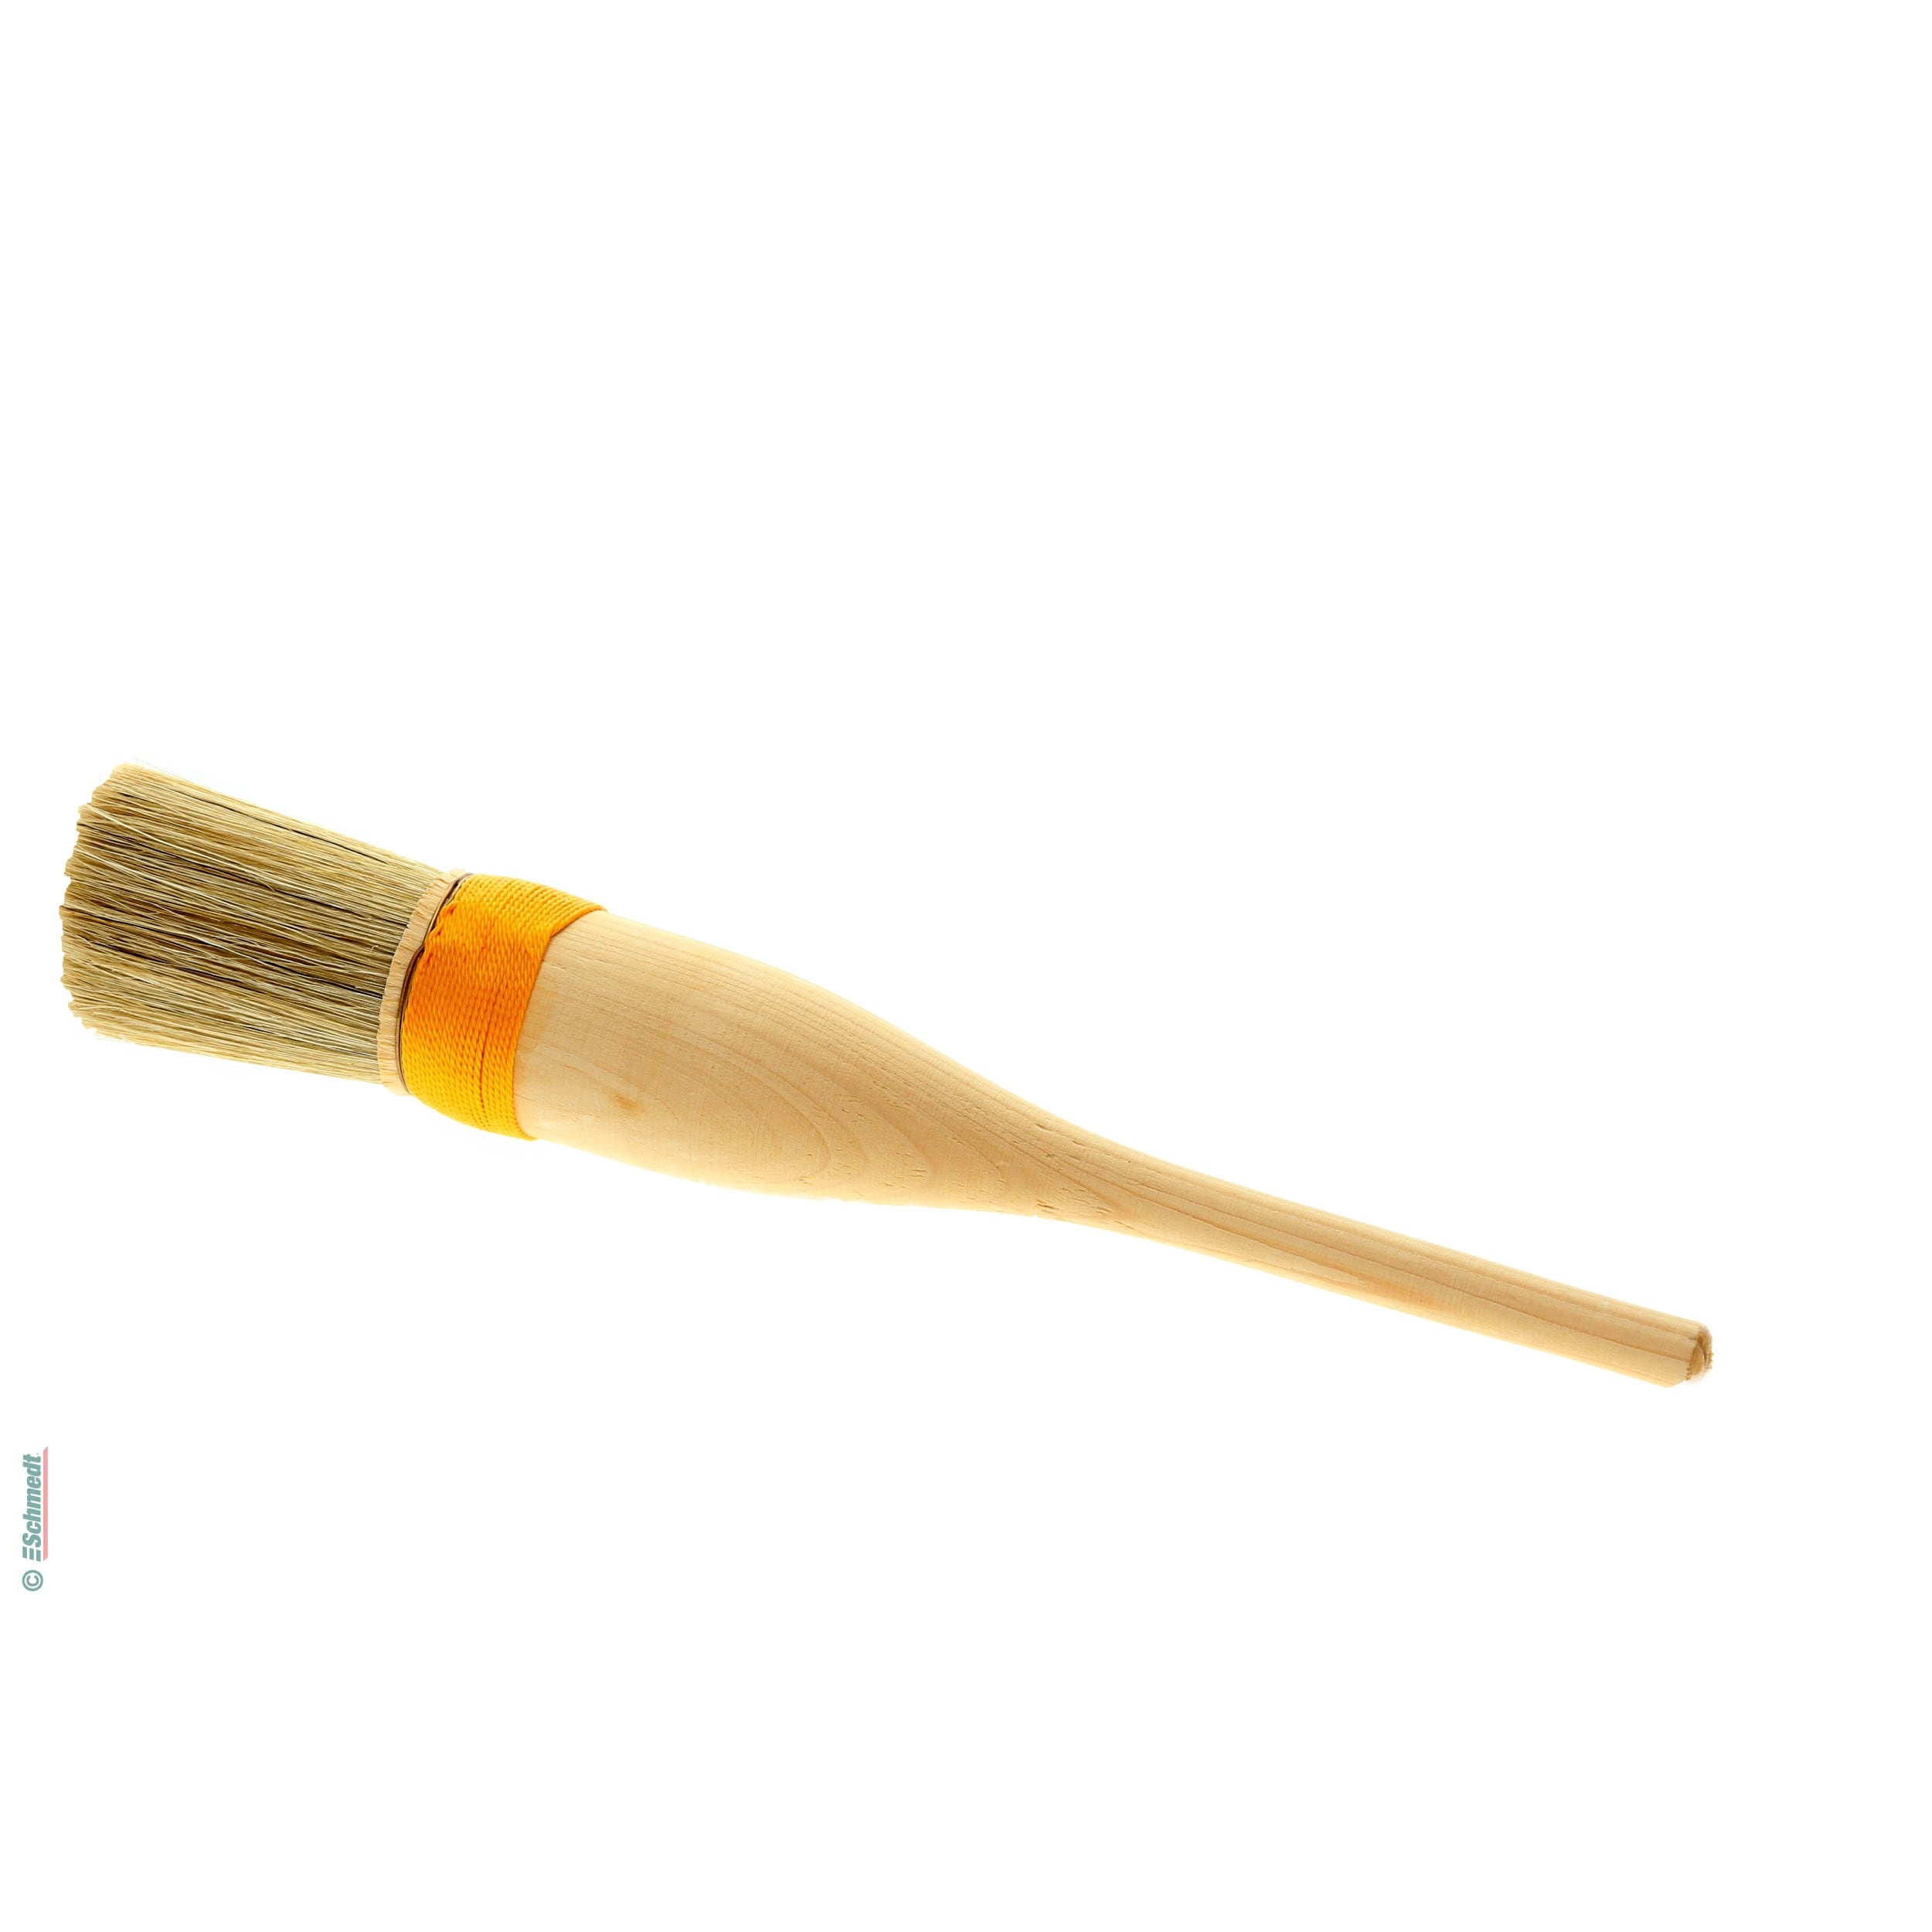 Paste brush, round, bridled with cord - Size 18 - Diameter (in mm) 35 - the thickening handle helps to comfortably apply paste and other col...